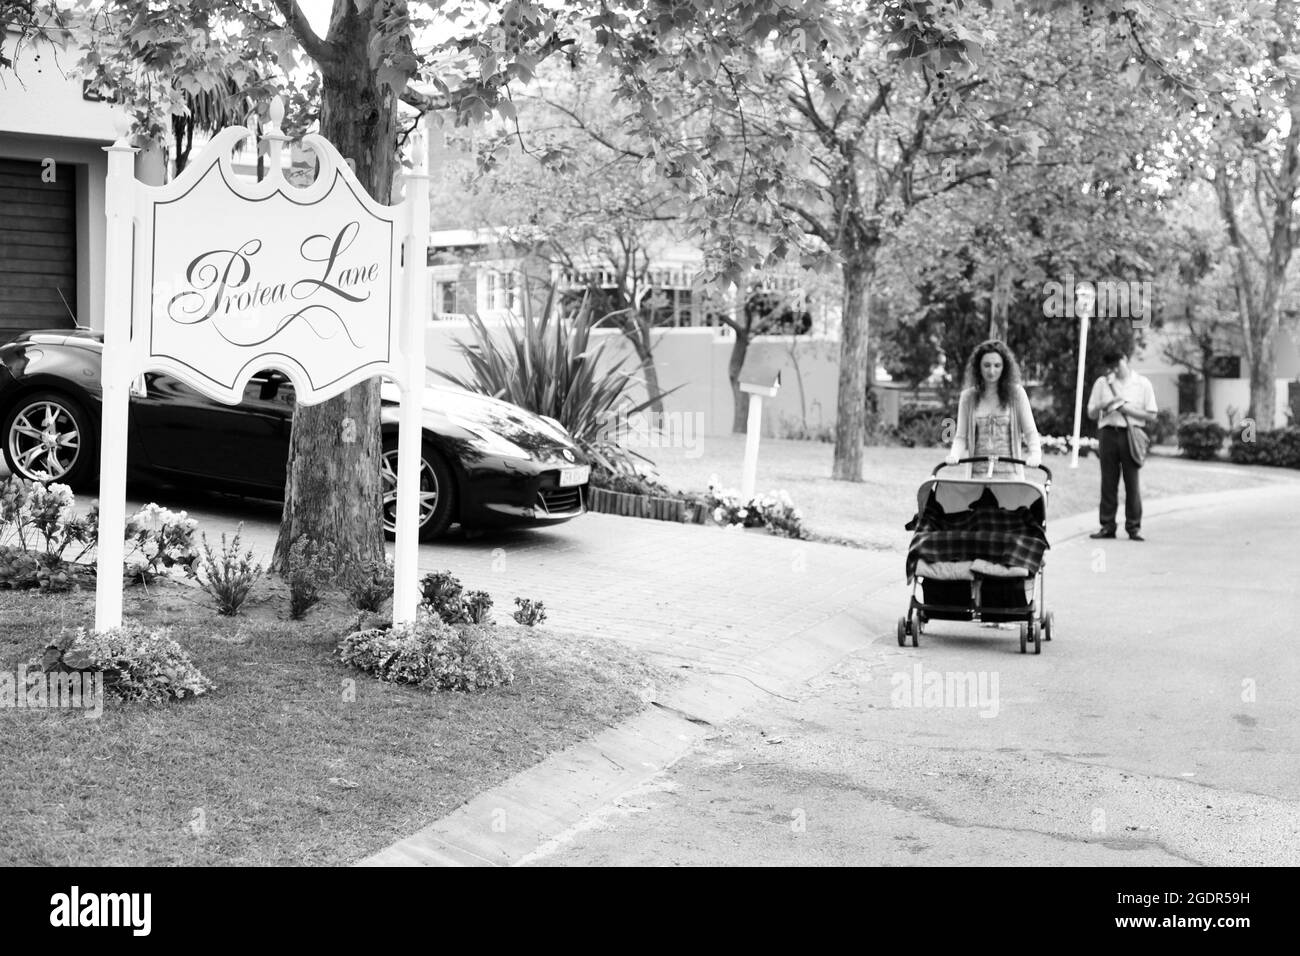 JOHANNESBURG, SOUTH AFRICA - Jan 05, 2021: A female with a pram and a mailman delivering mail in a wealthy suburban neighborhood street Stock Photo